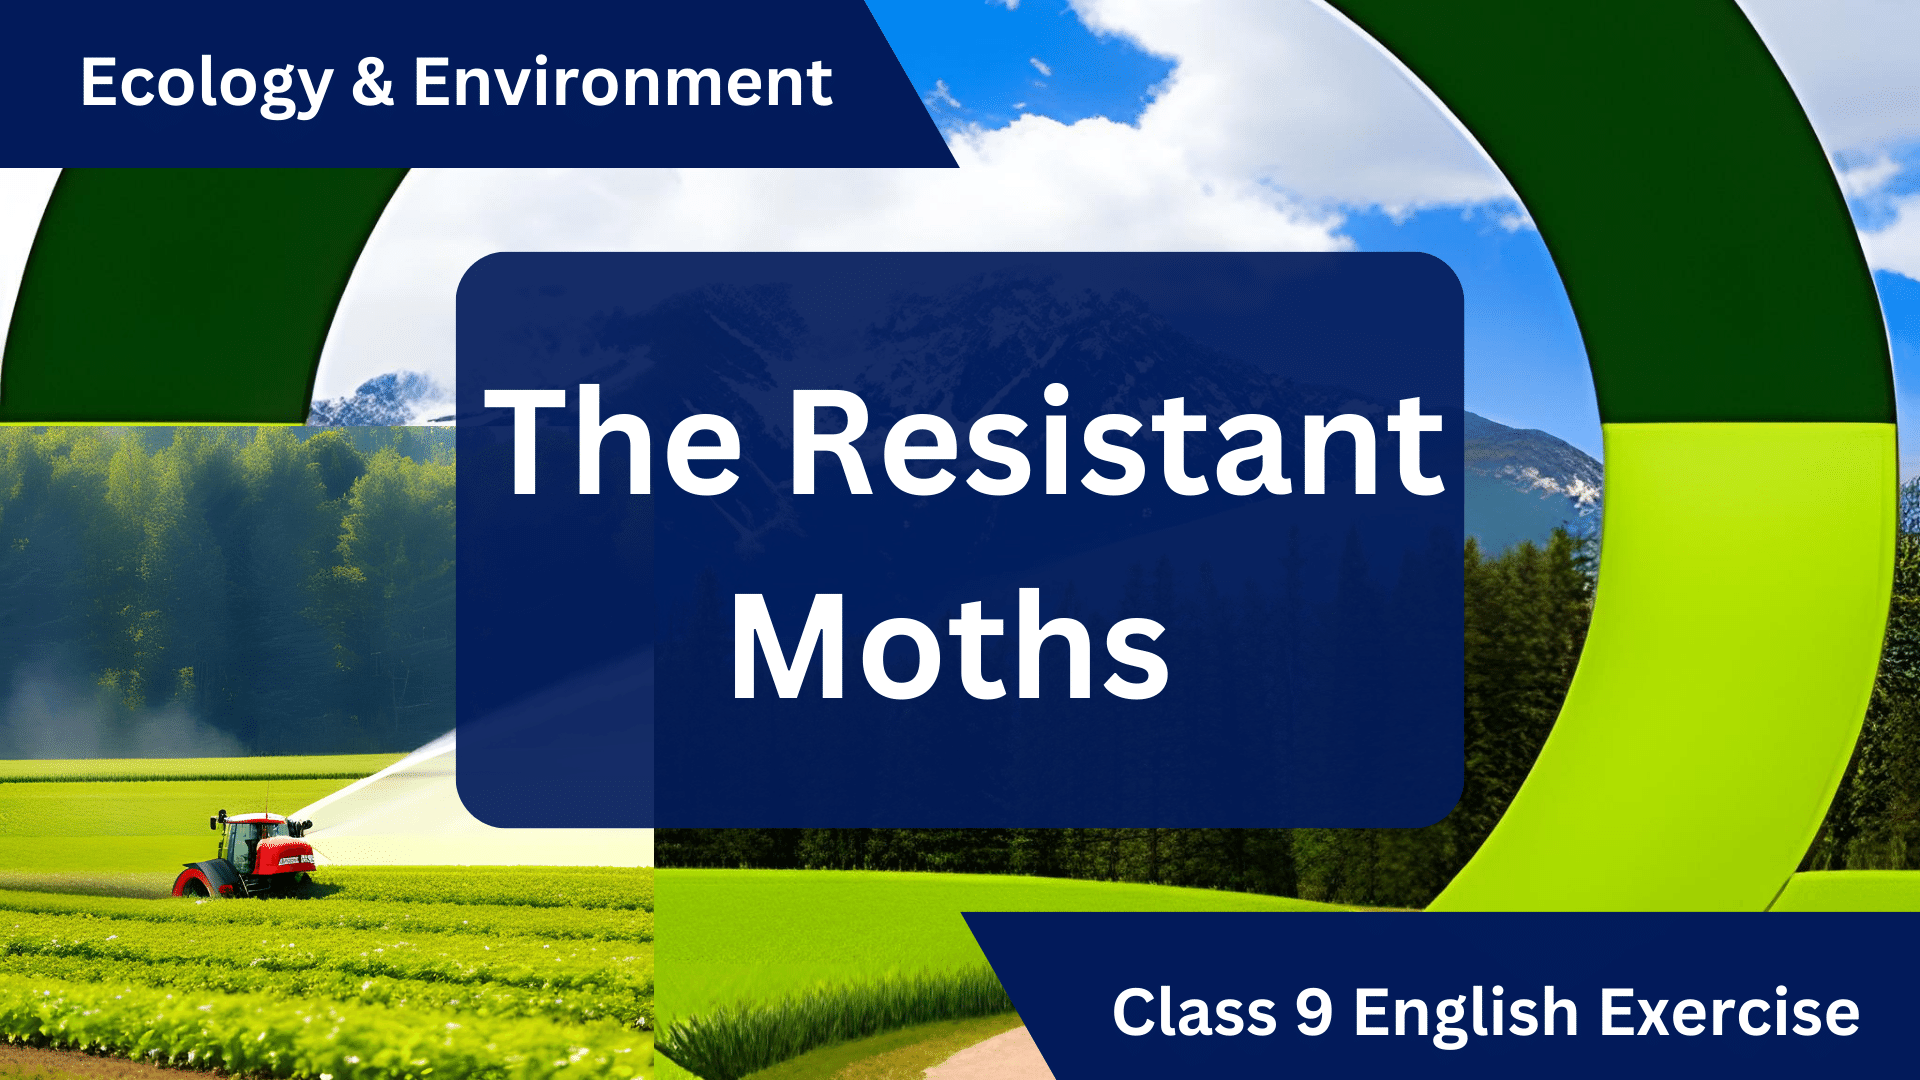 Unit-7 Ecology & Environment: The Resistant Moths - Class 9 English Exercise